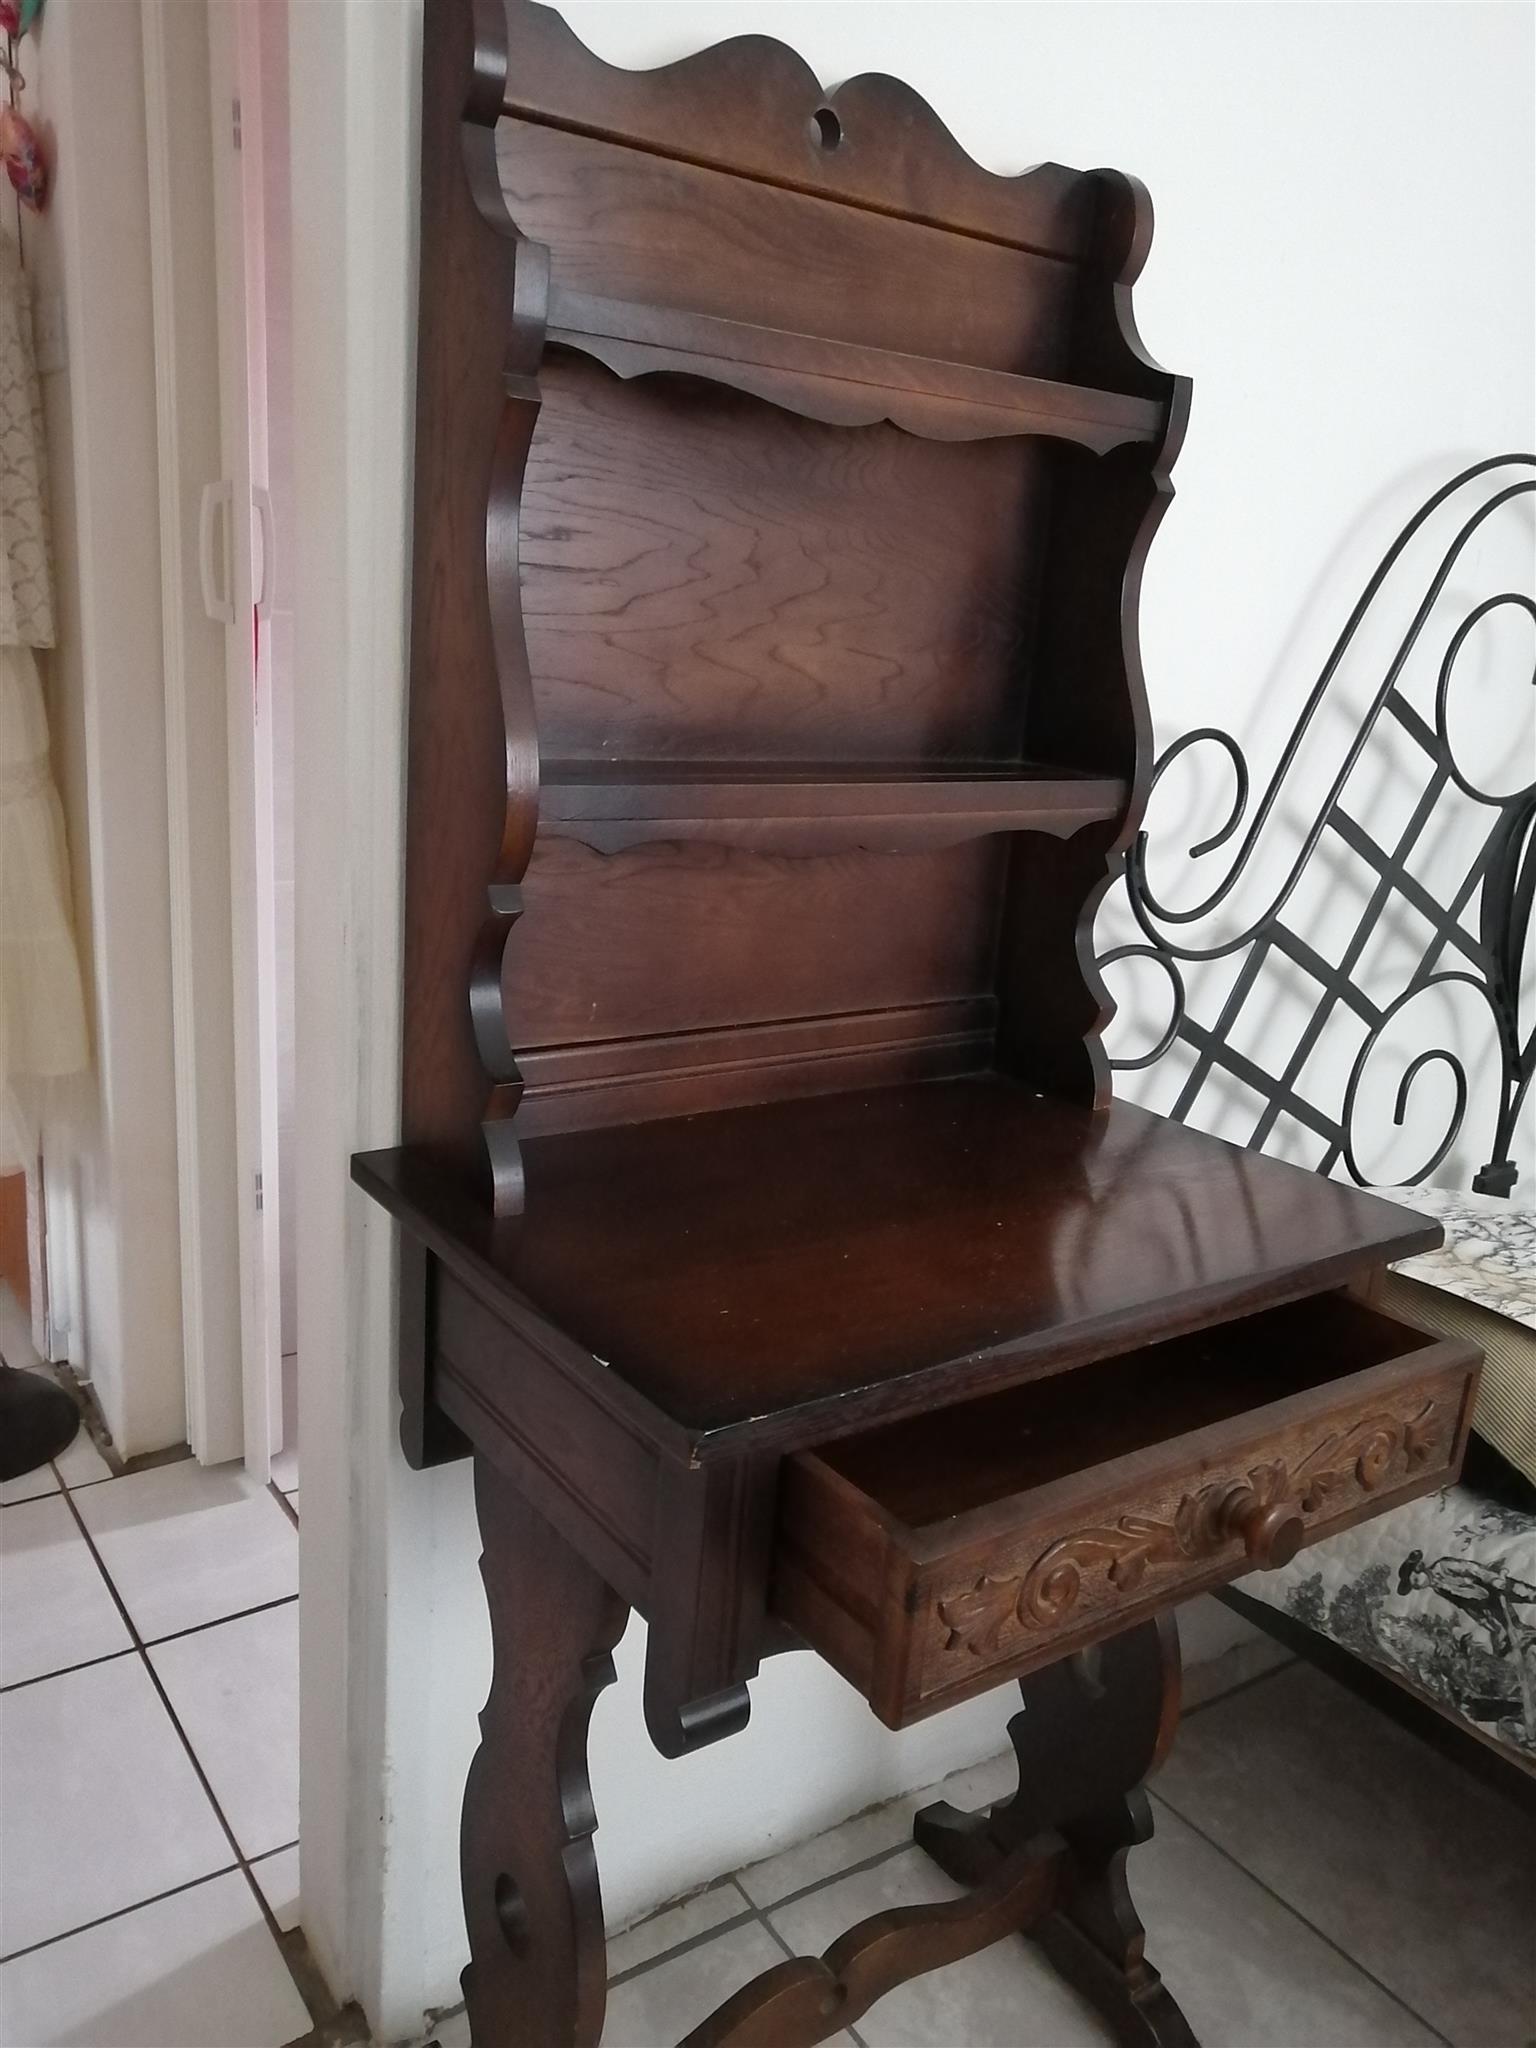 Antique Study Desk with chair